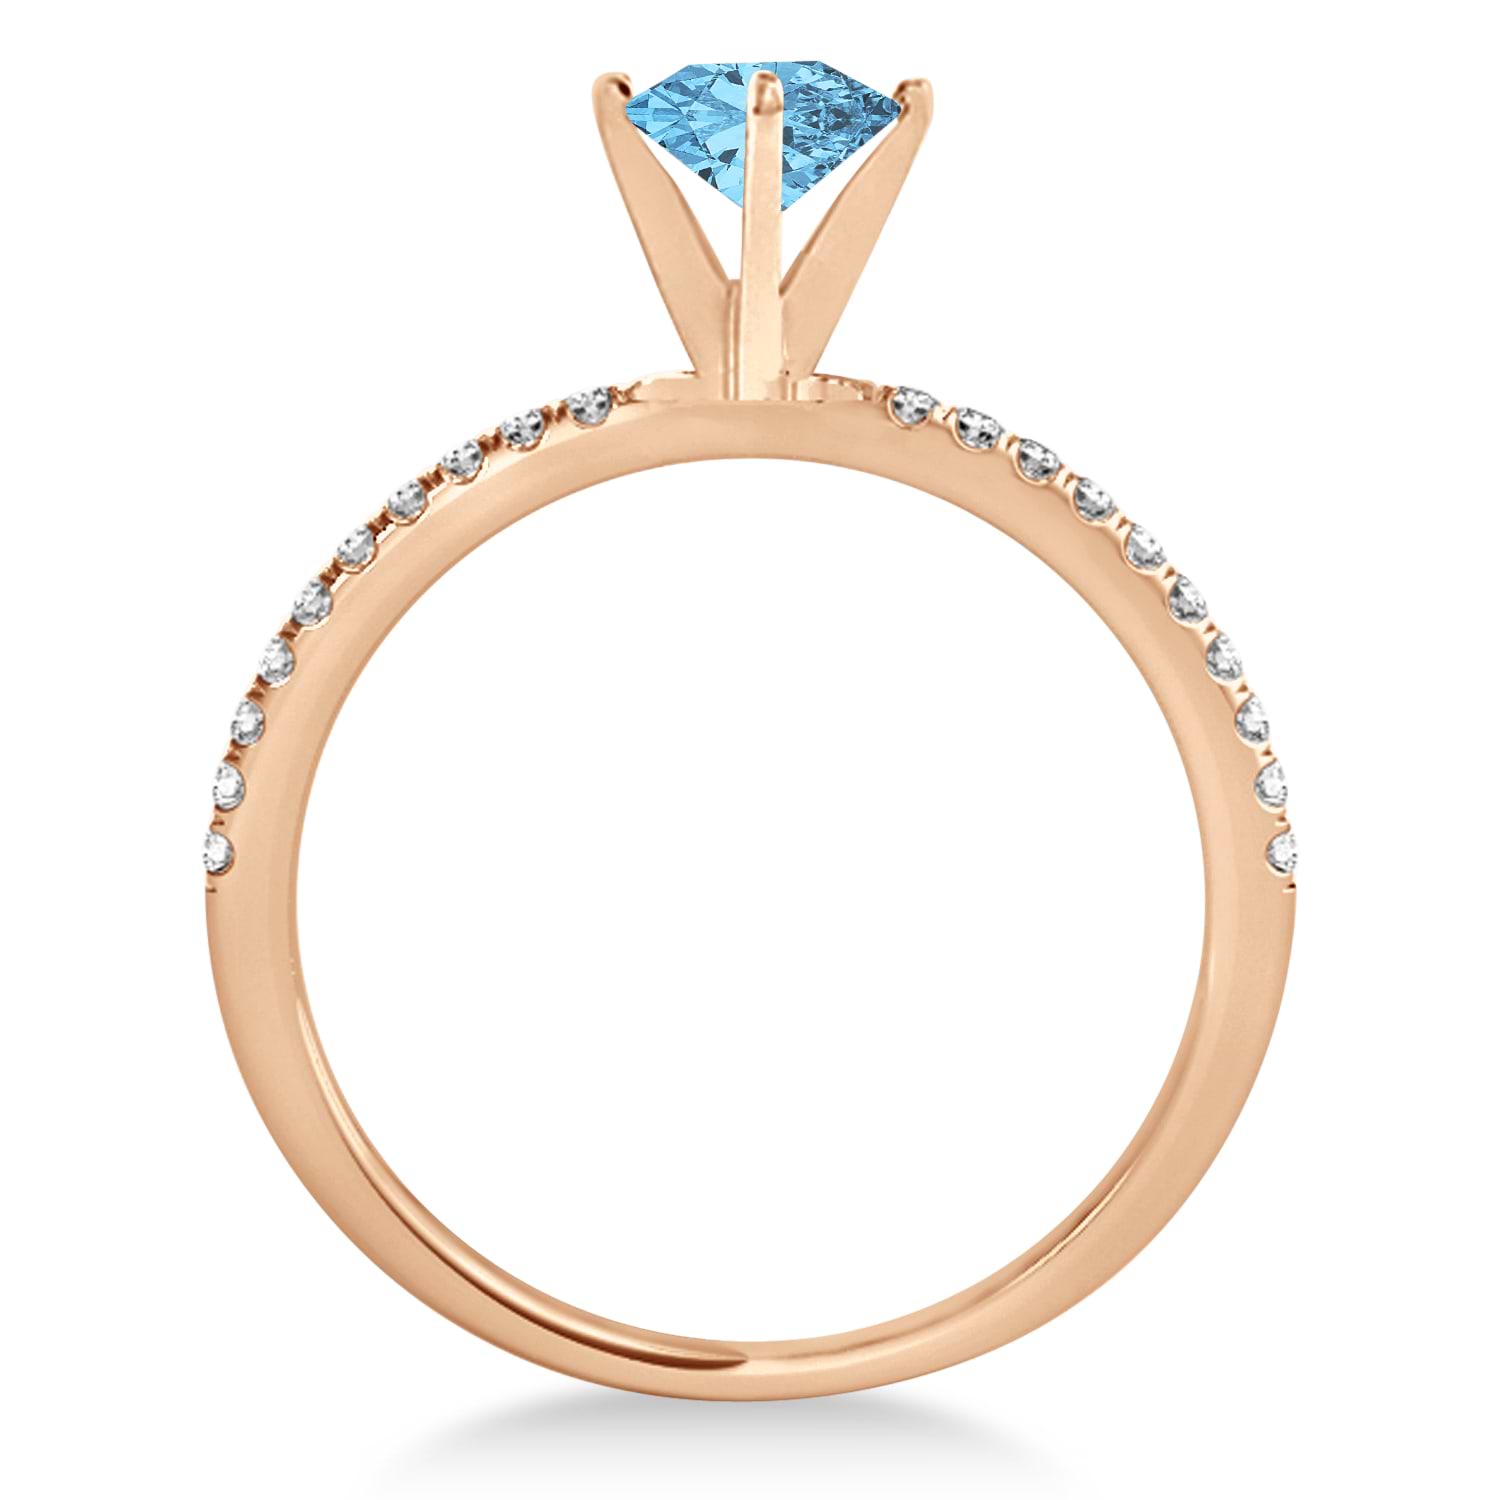 Blue Topaz & Diamond Accented Oval Shape Engagement Ring 14k Rose Gold (1.00ct)